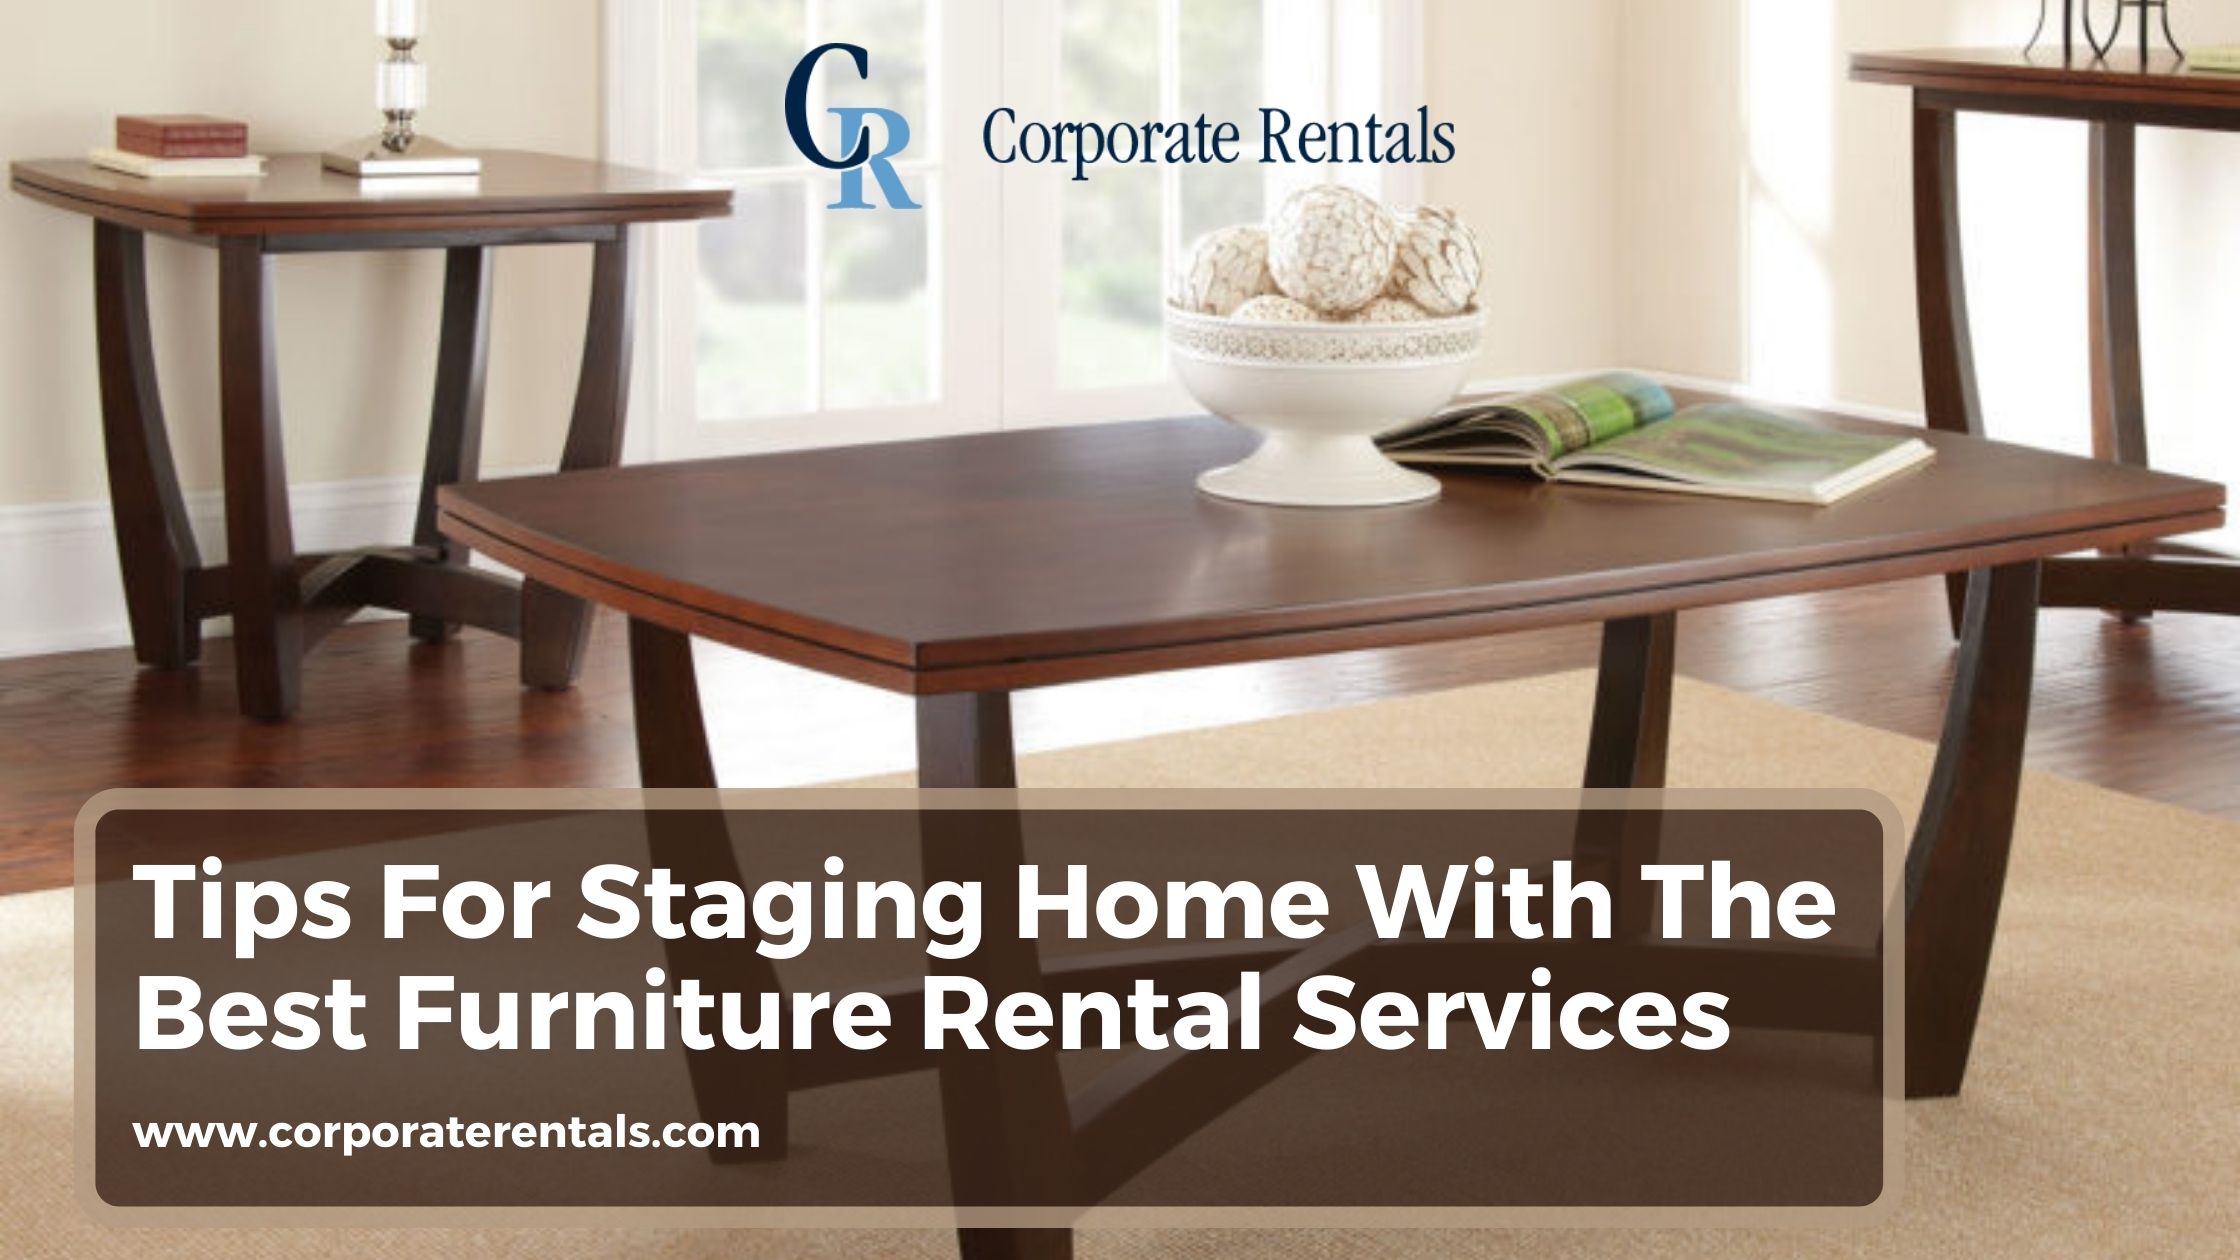 Tips For Staging Home With The Best Furniture Rental Services